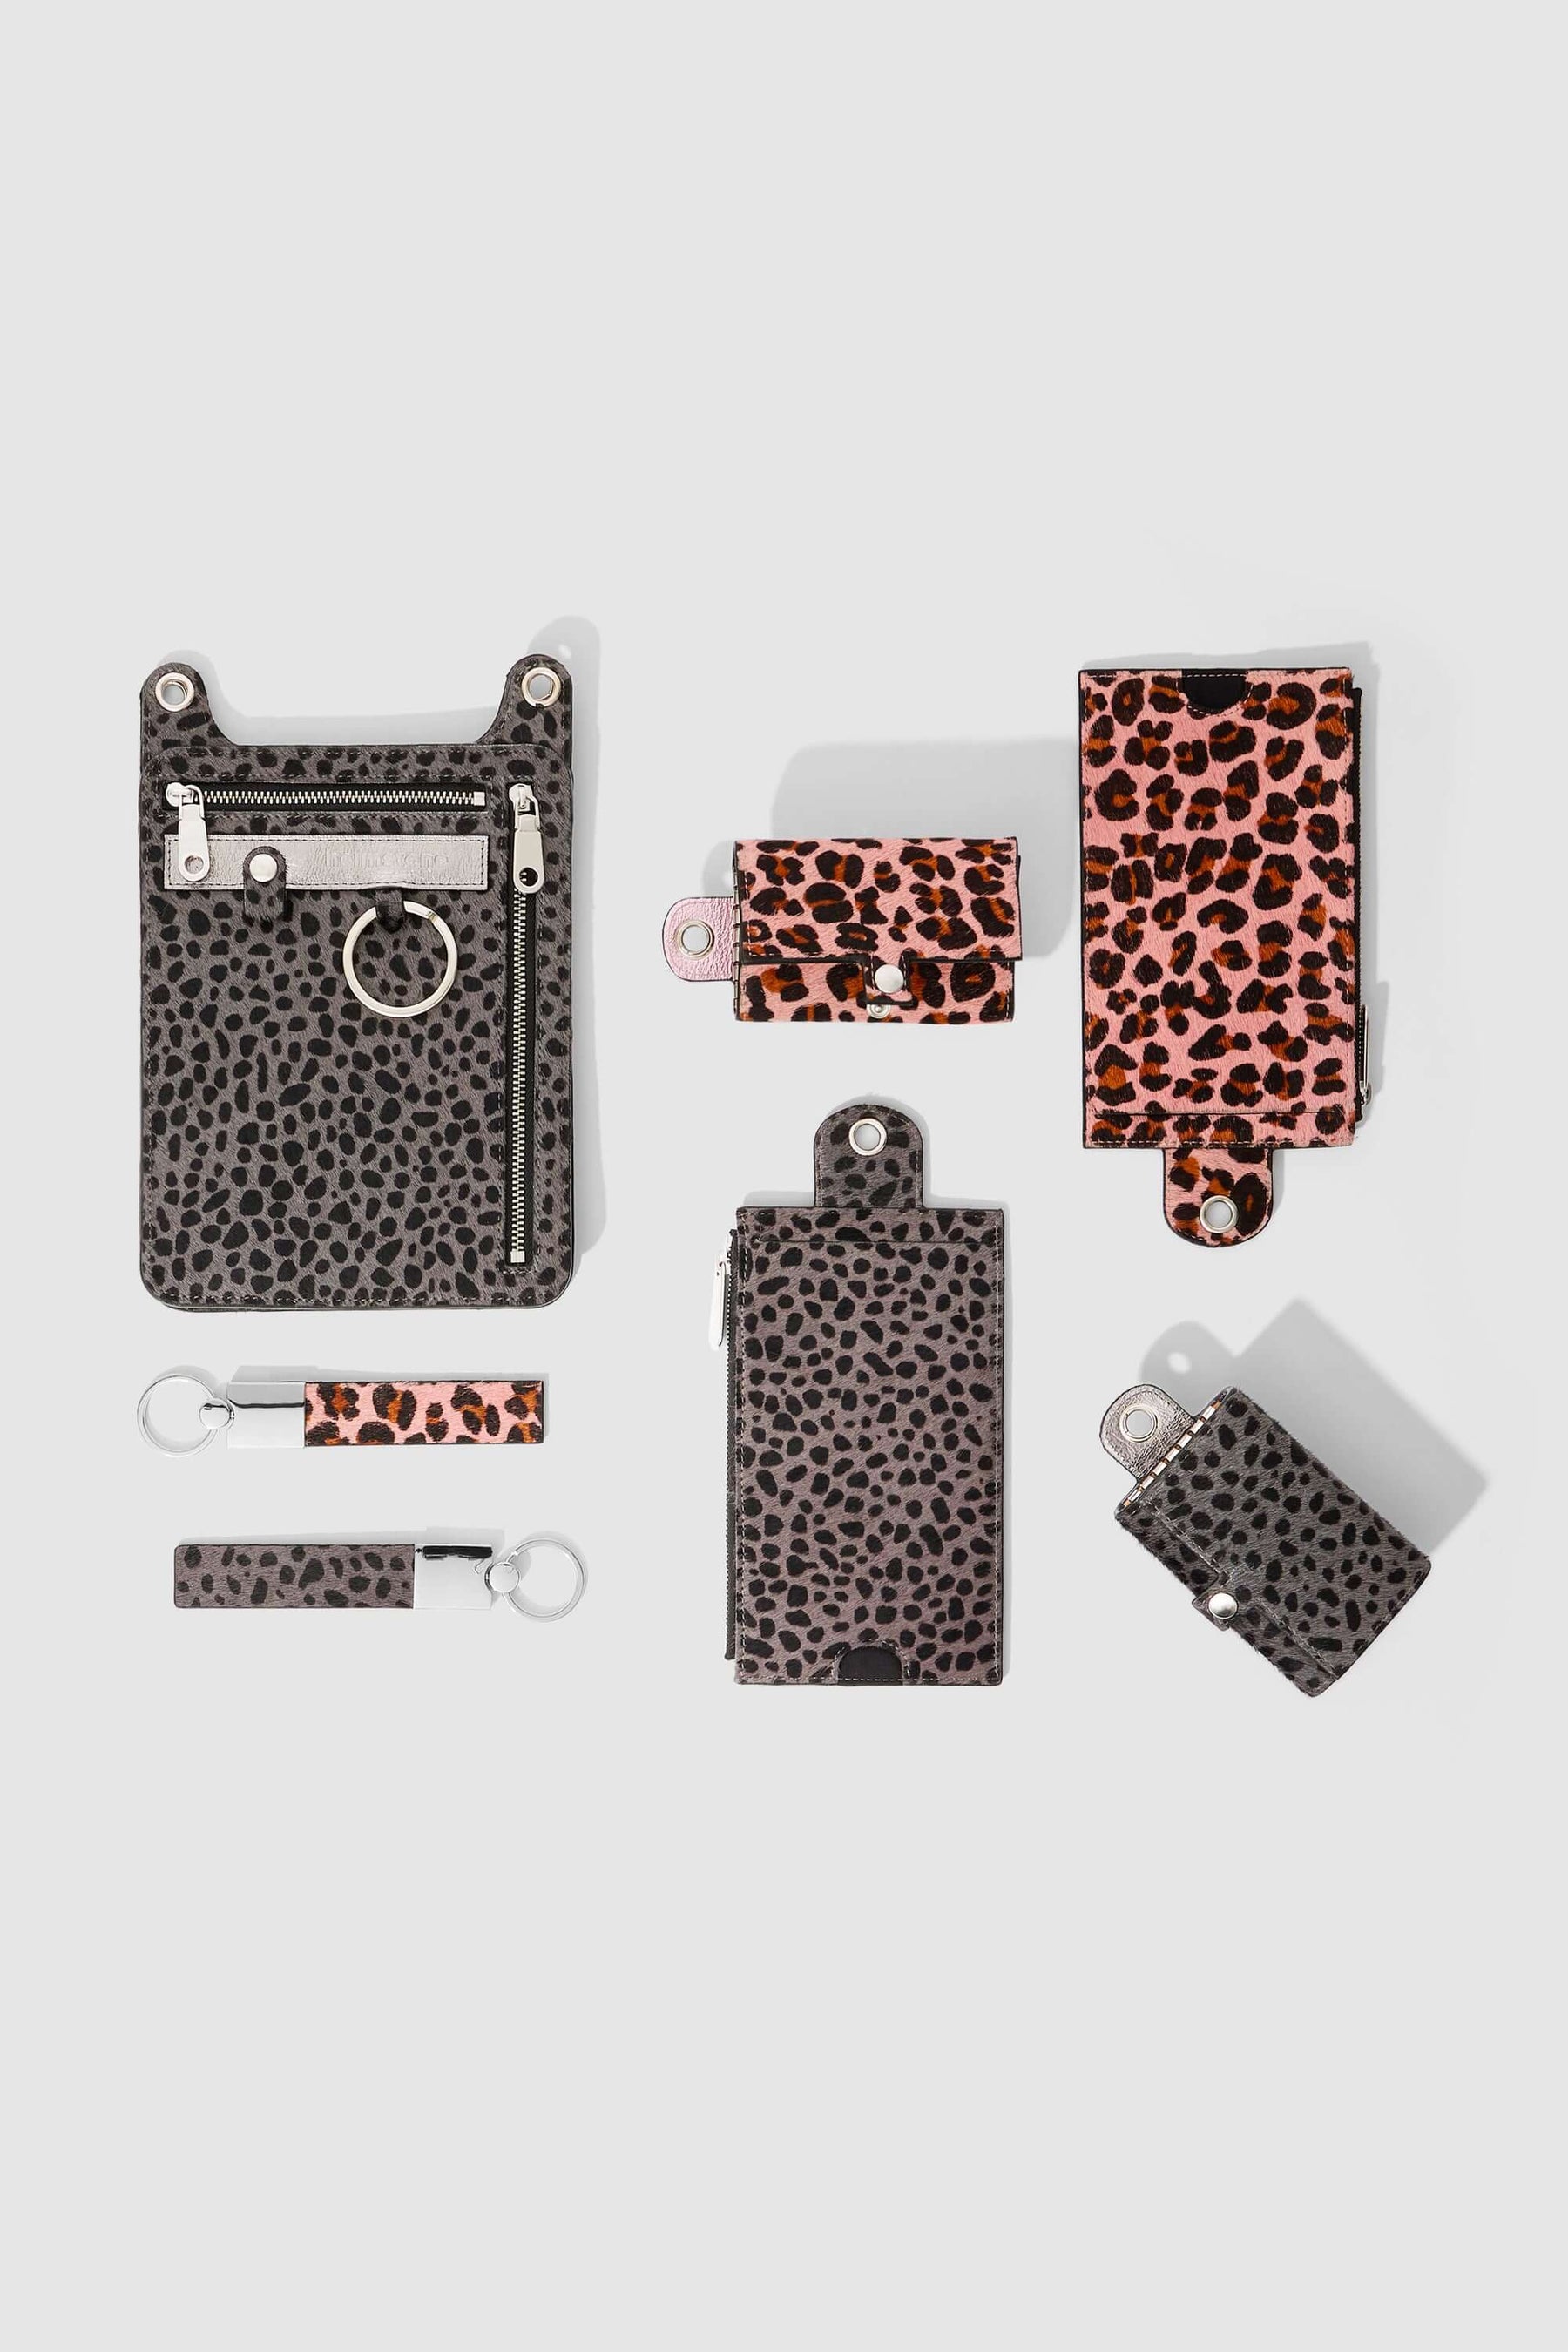 The Minis - 6 key holder in grey Cheetah printed leather